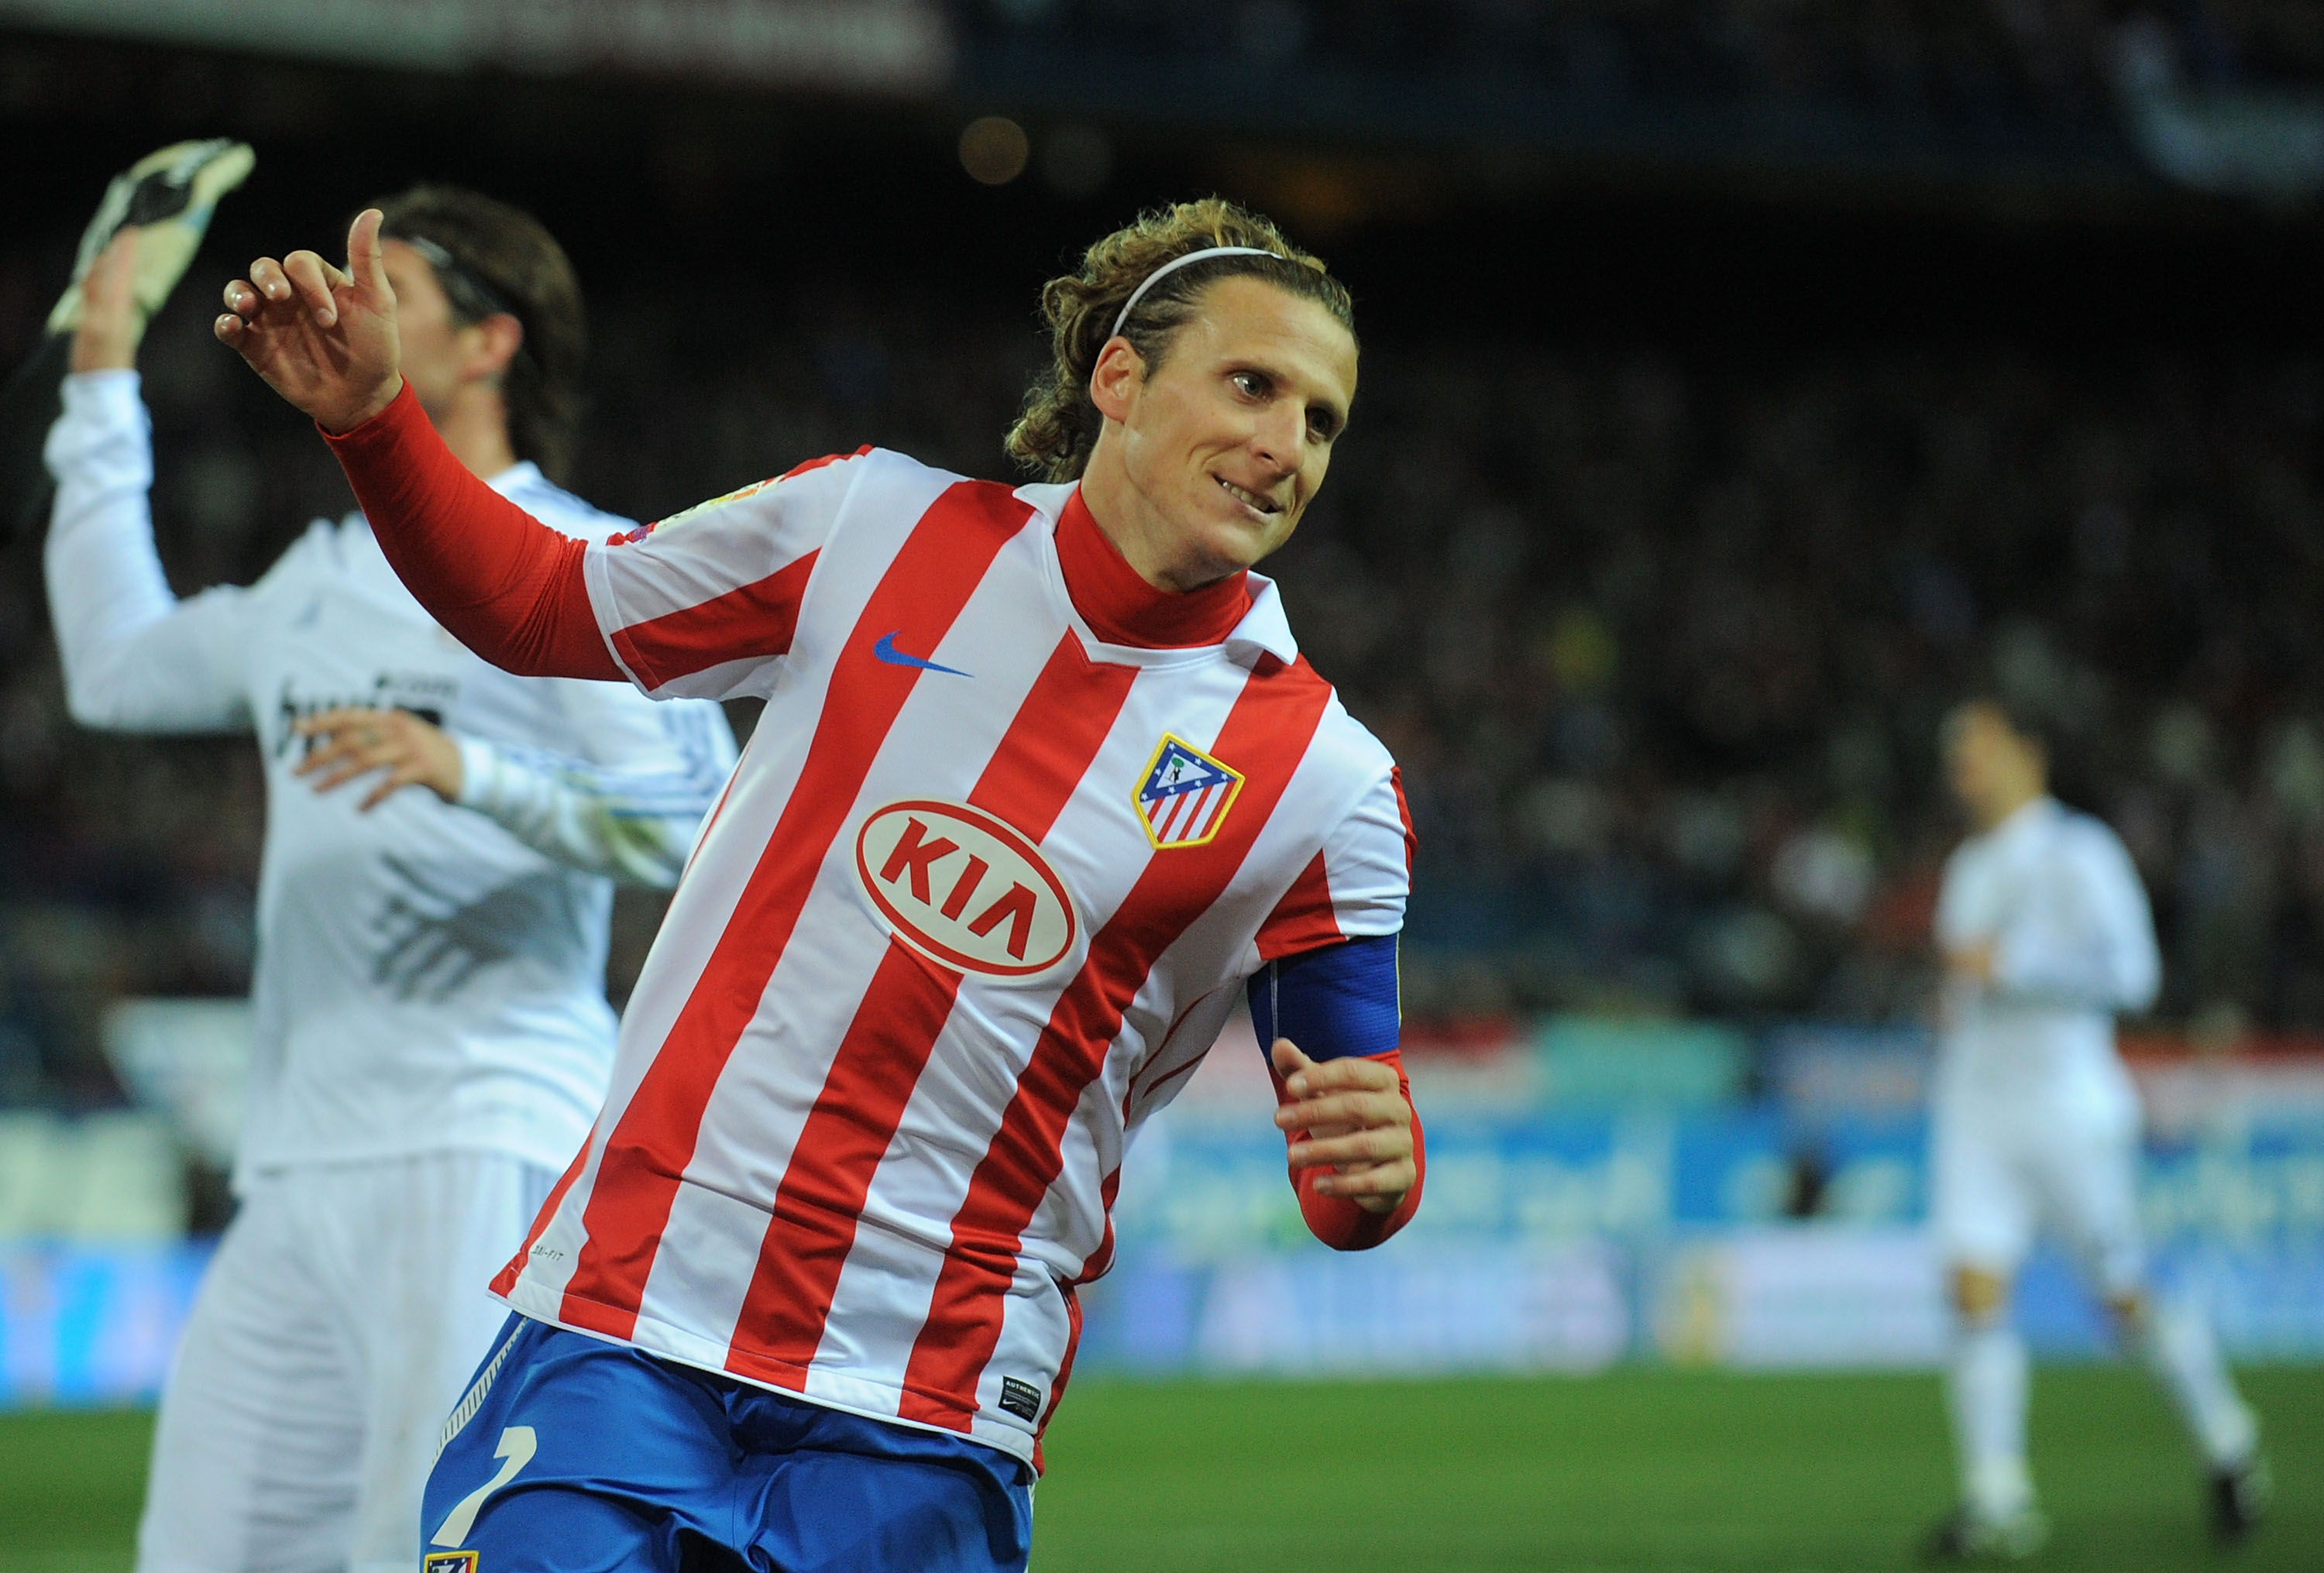 MADRID, SPAIN - JANUARY 20:  Diego Forlan of Atletico Madrid reacts during the Copa del Rey quarter final second leg match between Atletico Madrid and Real Madrid at Vicente Calderon Stadium on January 20, 2011 in Madrid, Spain.  (Photo by Denis Doyle/Get